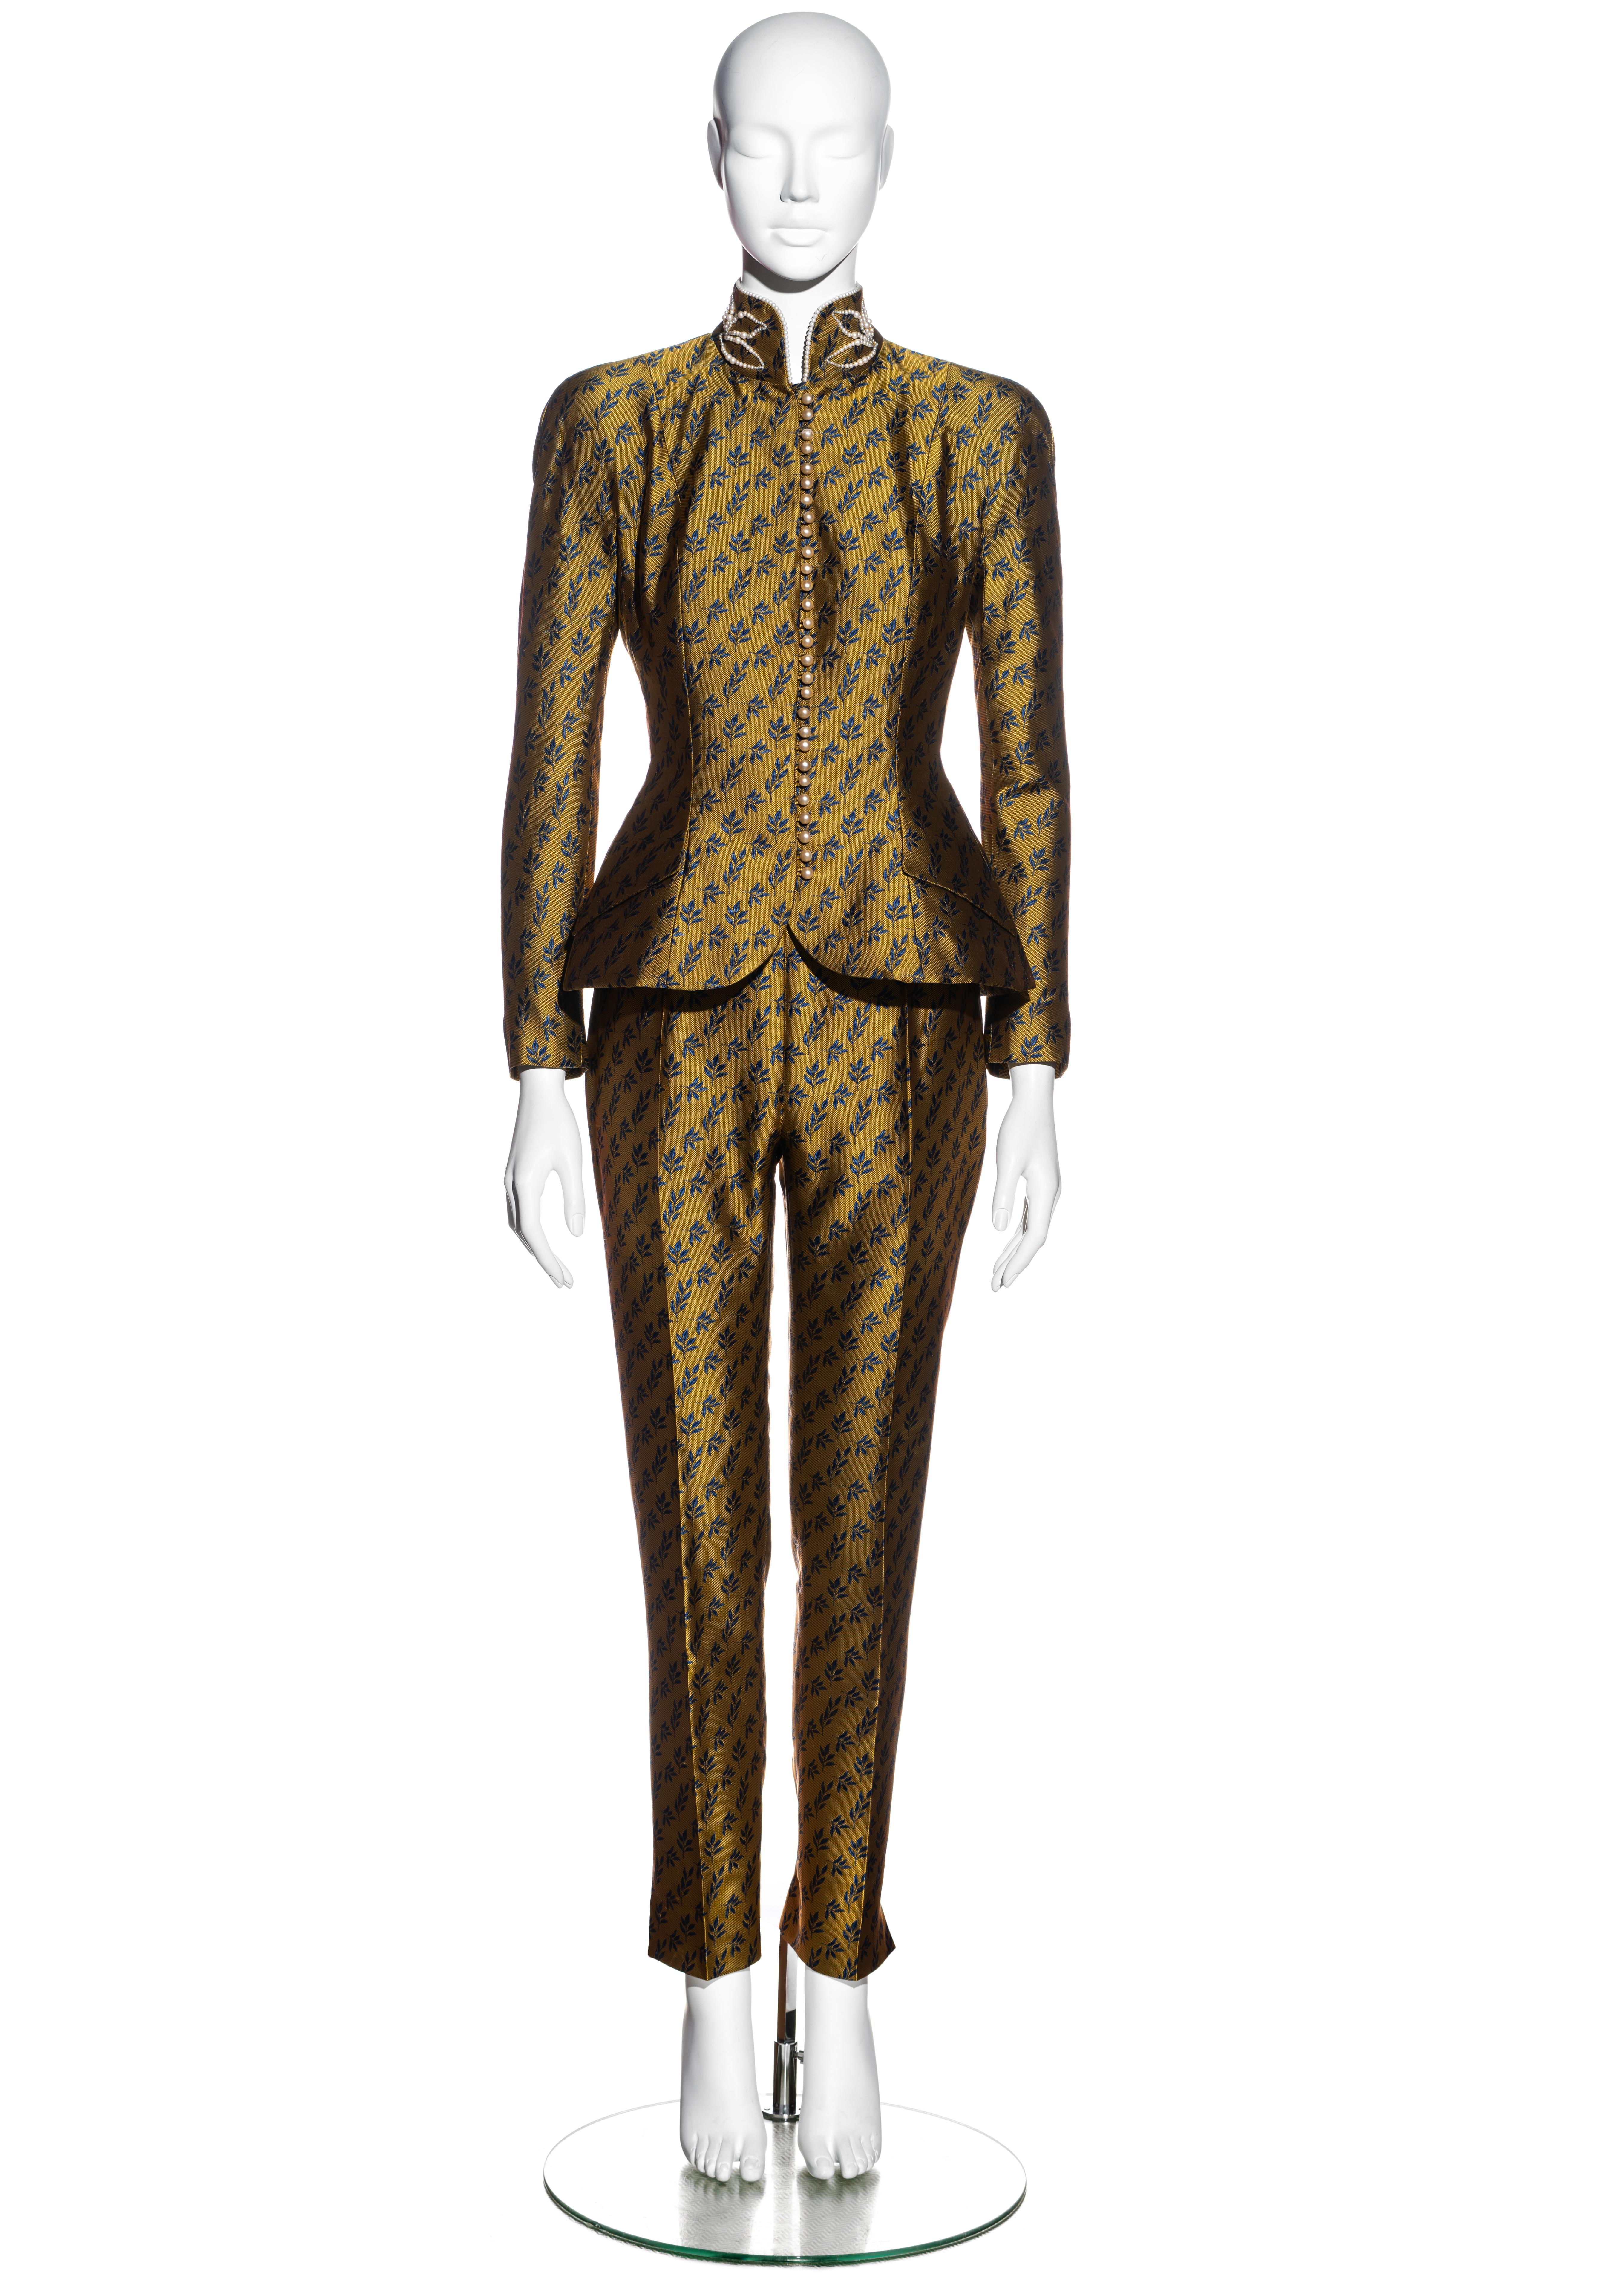 ▪ Christian Dior gold satin jacquard fitted evening pant suit  
▪ Designed by John Galliano 
▪ Mandarin collar adorned with faux pearls  
▪ 28 faux pearl buttons  
▪ Padded hips and shoulders  
▪ High-rise slim fit pants
▪ FR 36 - UK 8 - US 4 
▪